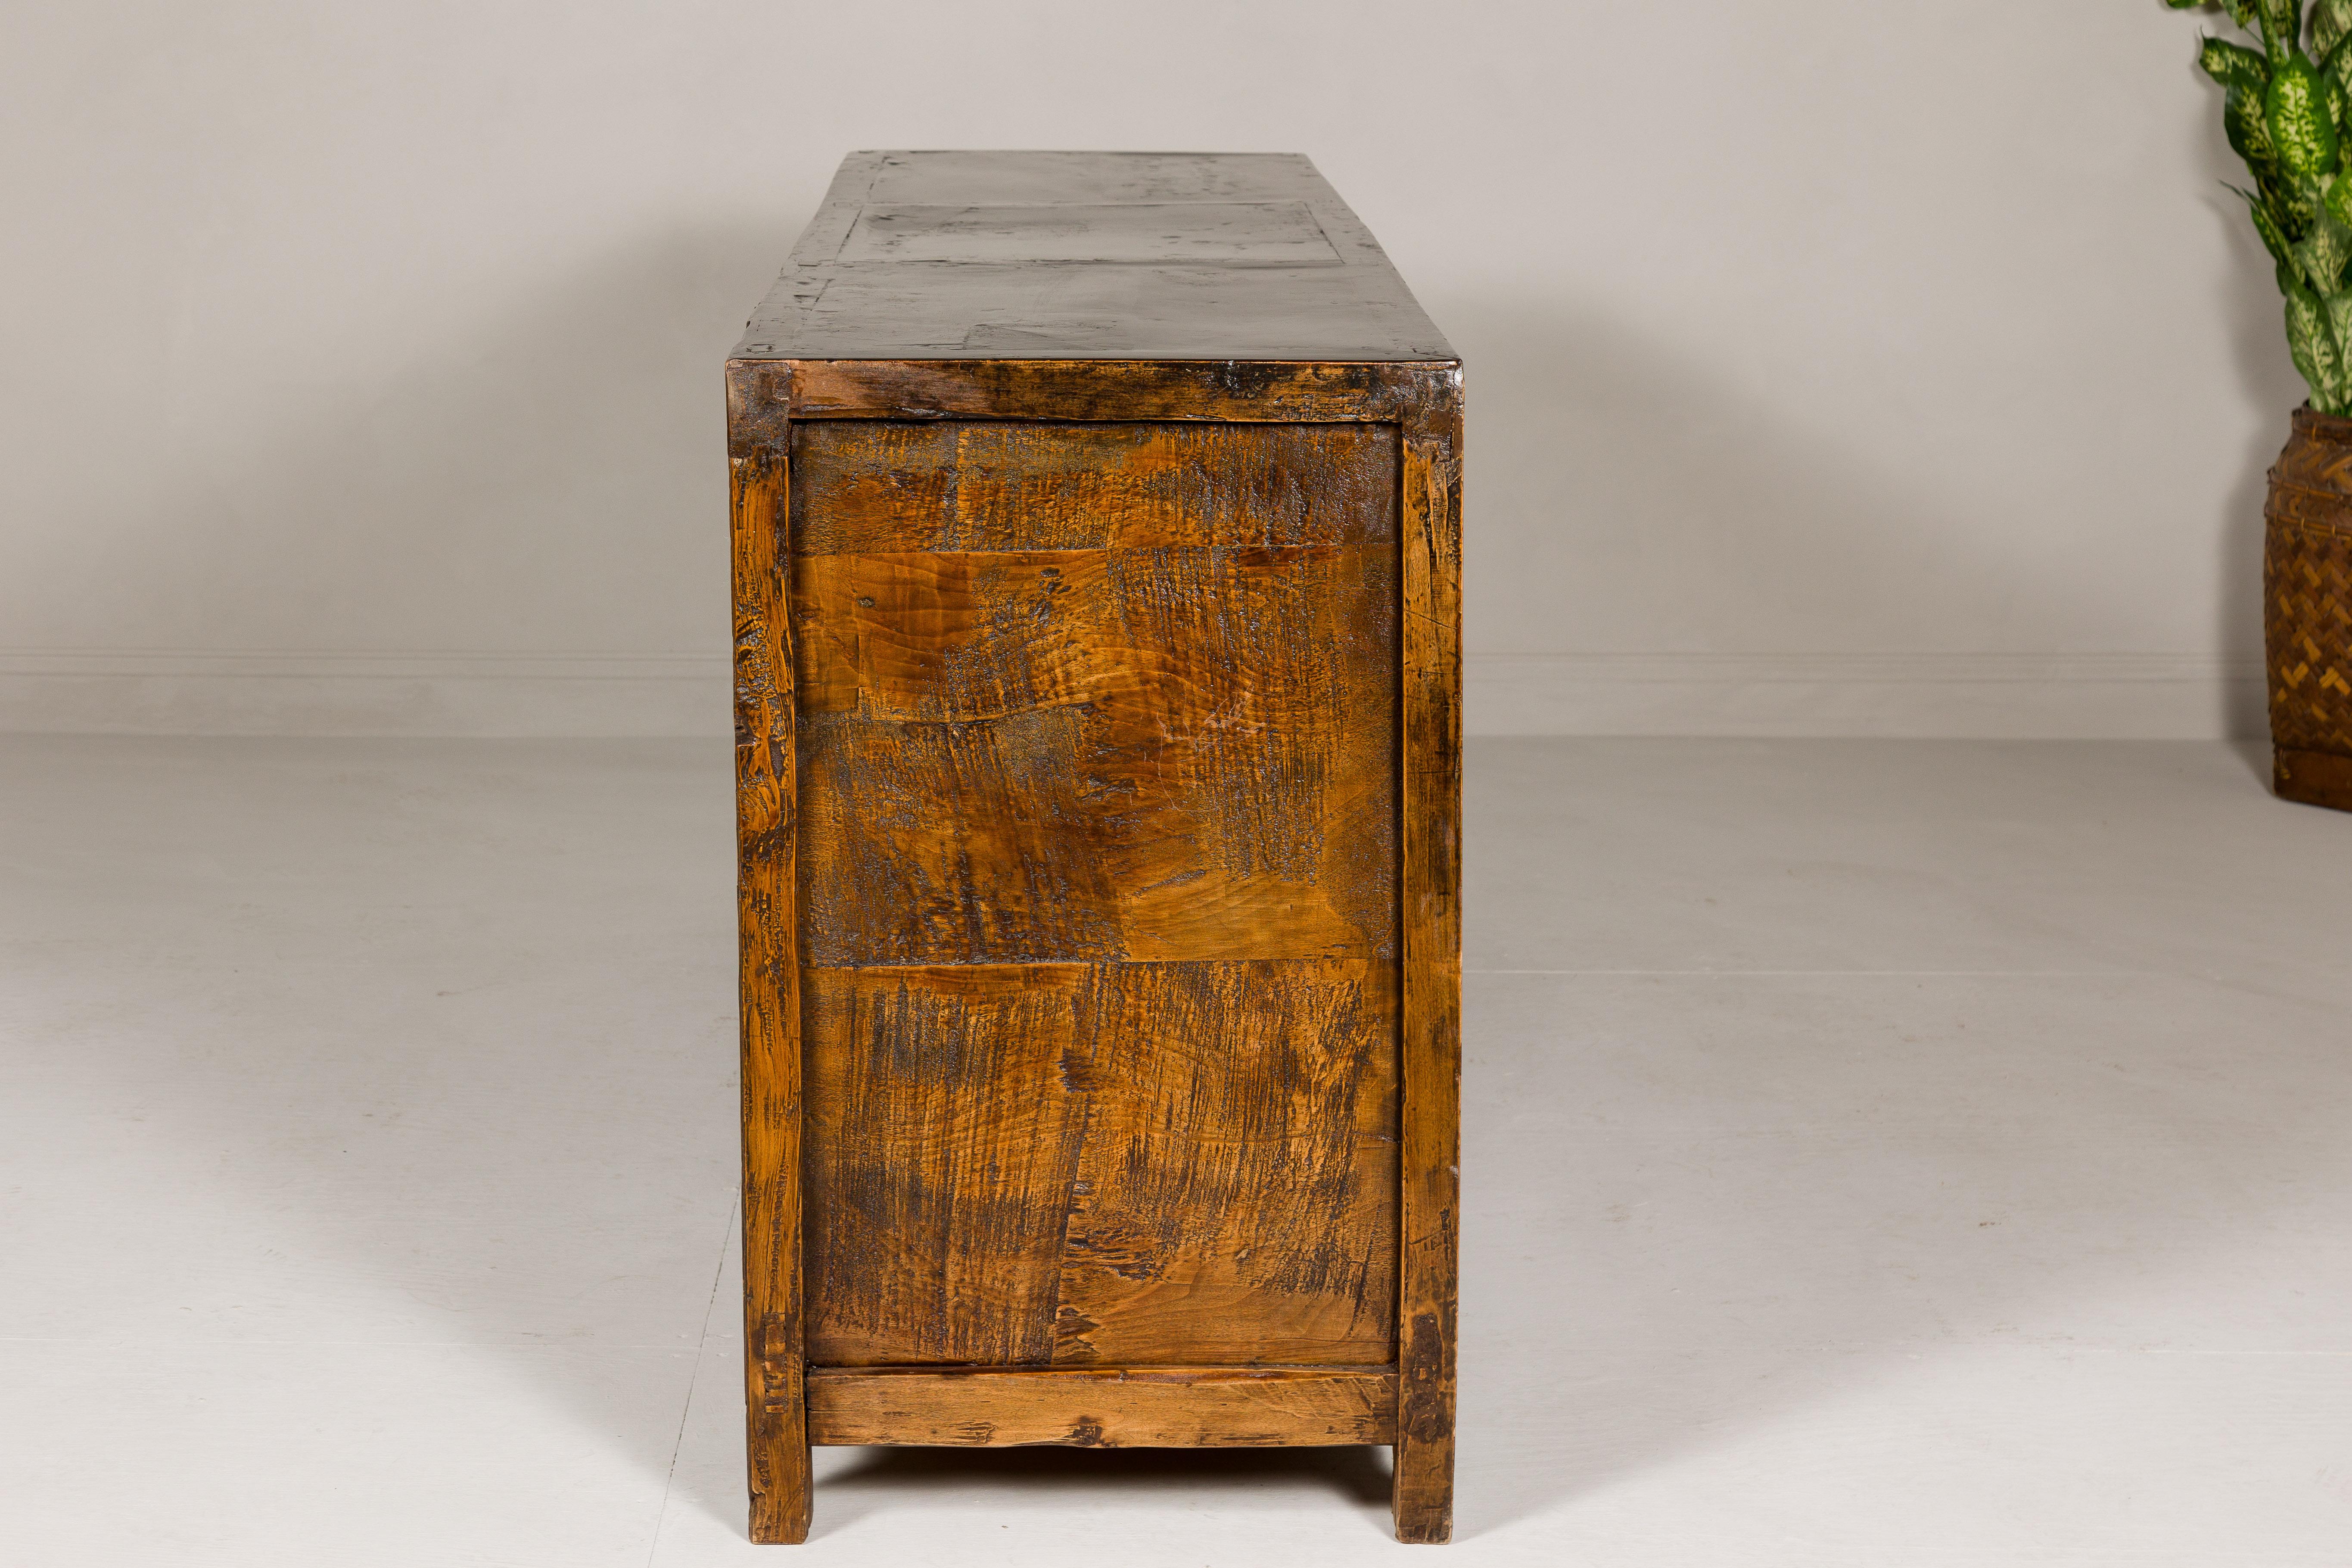 19th Century Mongolian Polychrome Sideboard with Doors, Drawers and Floral Décor For Sale 10